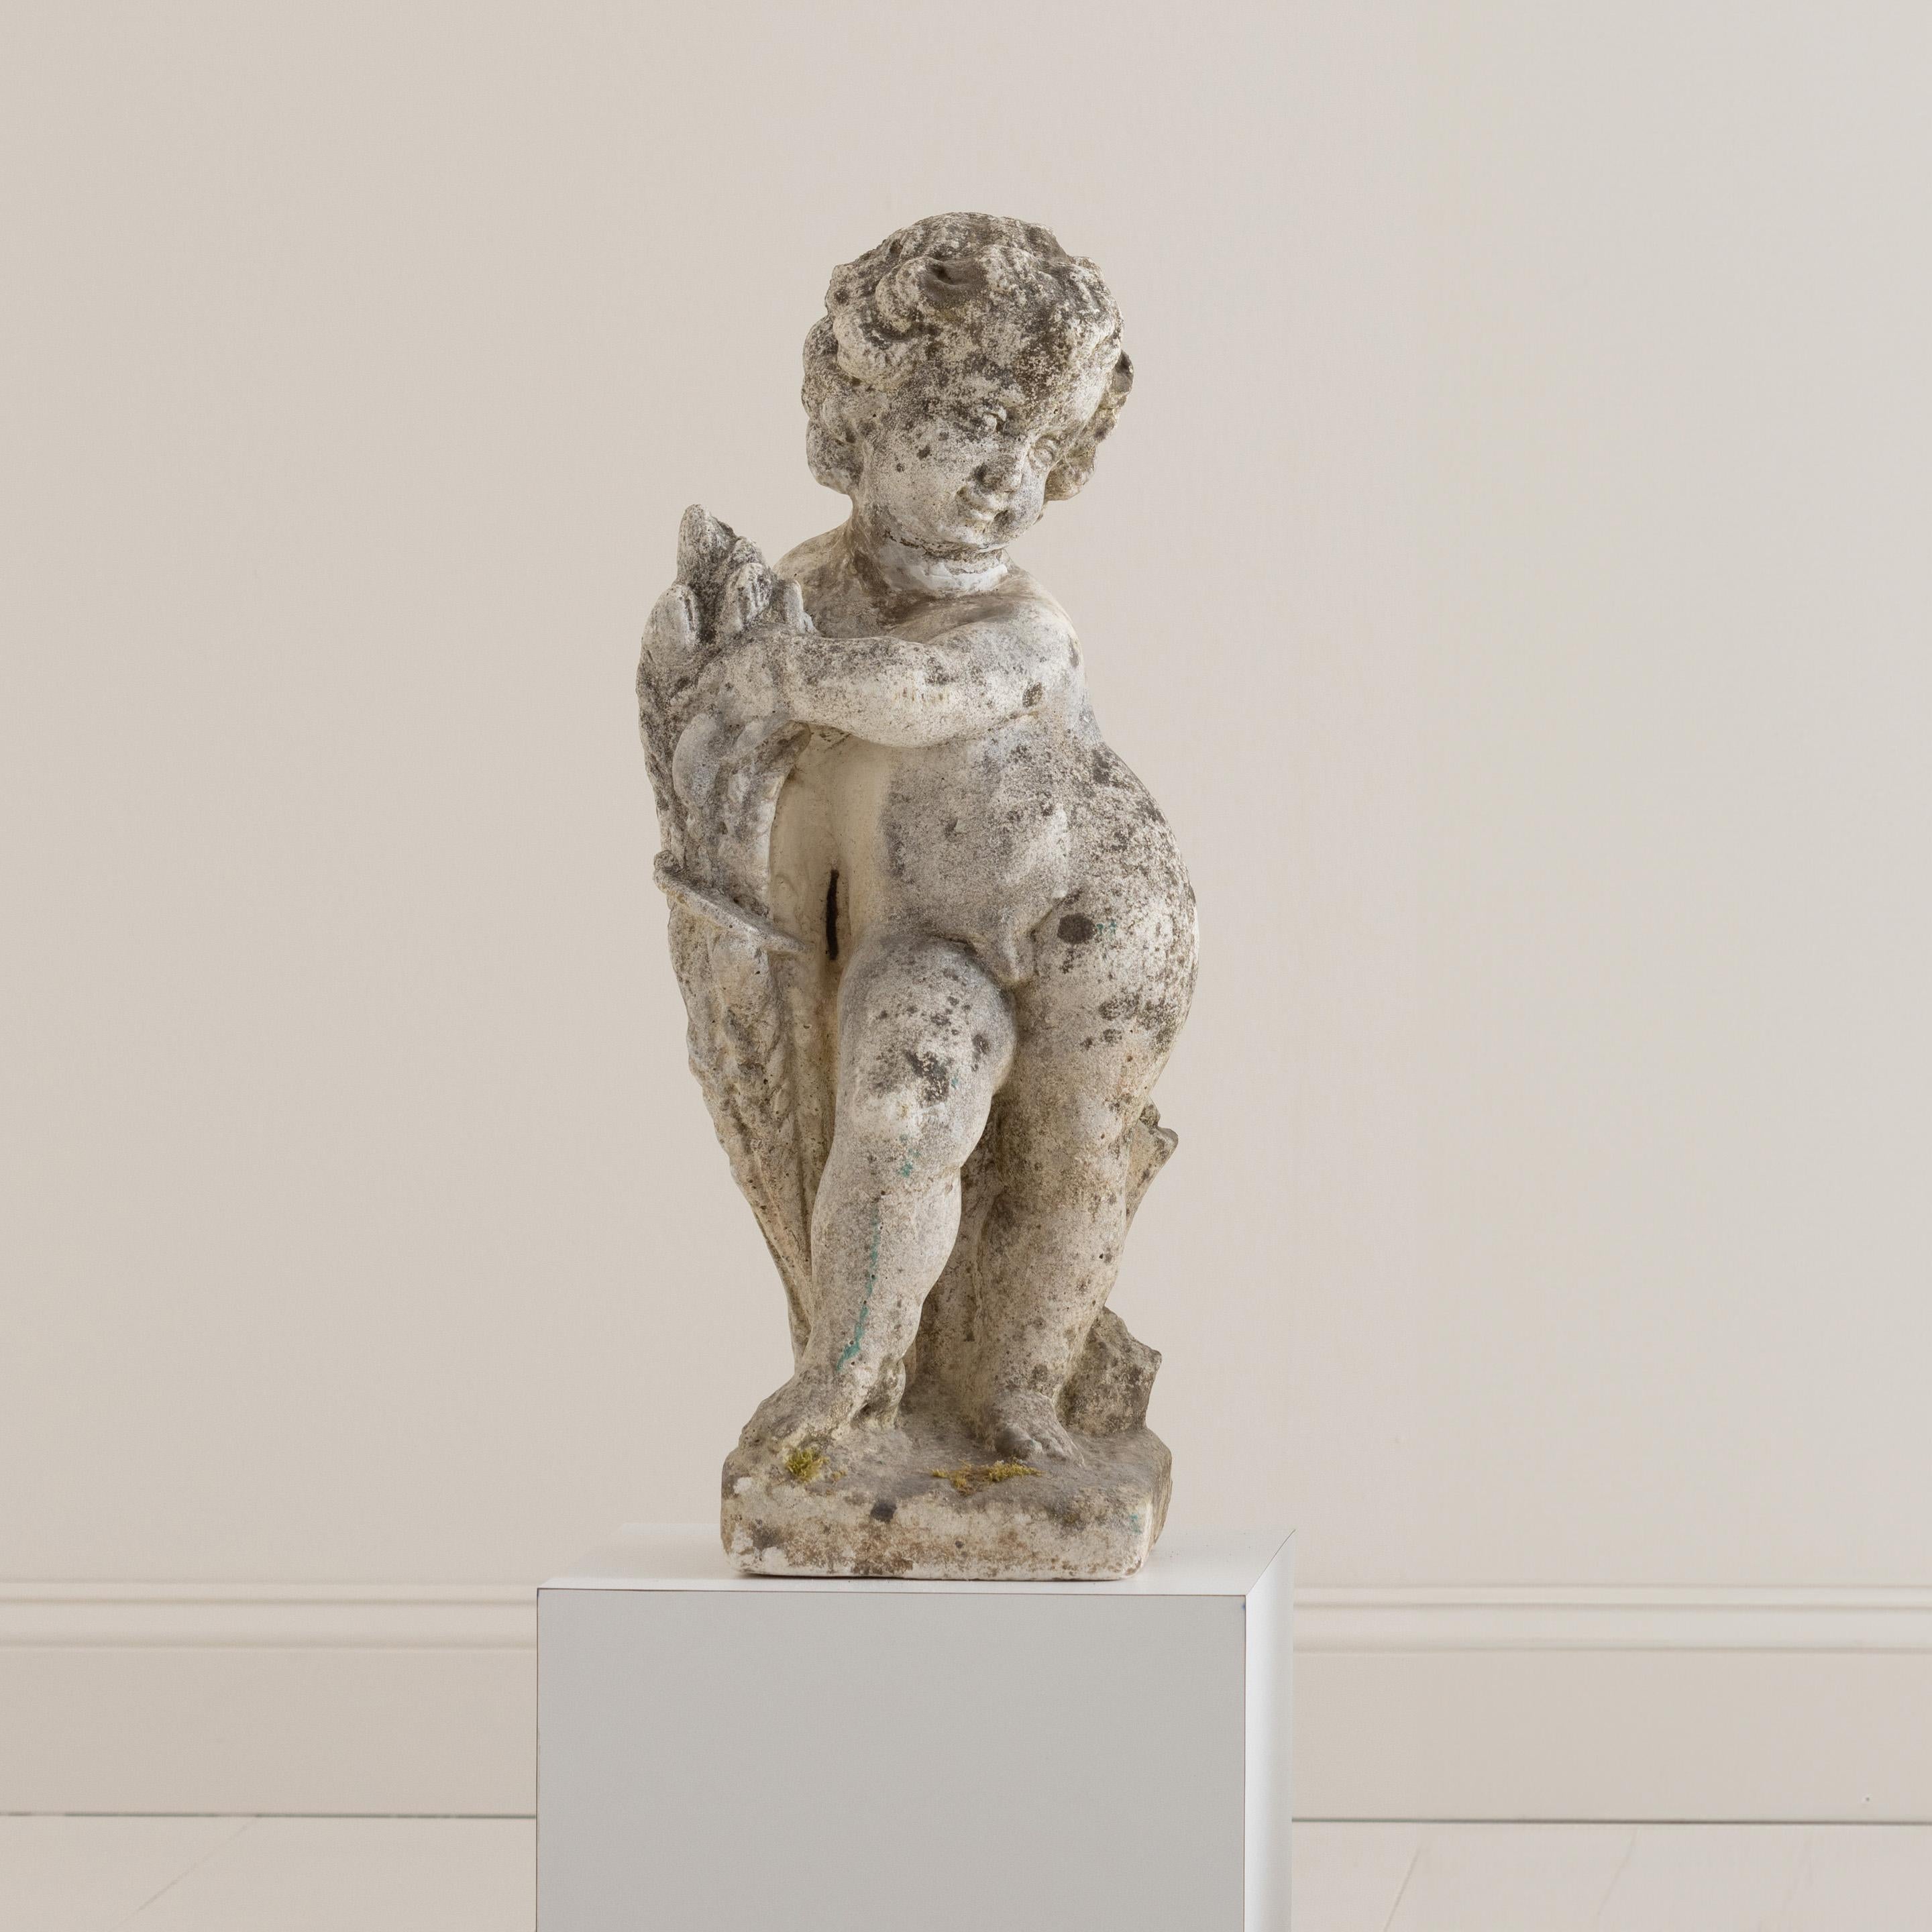 Early 20th century concrete Italian garden statue of cherub / putti figure, c. 1920. This charming, angelic statue is suitable for outdoor use. 


We offer expedited, fully-insured, custom packaged / crated, global shipping, including delivery to